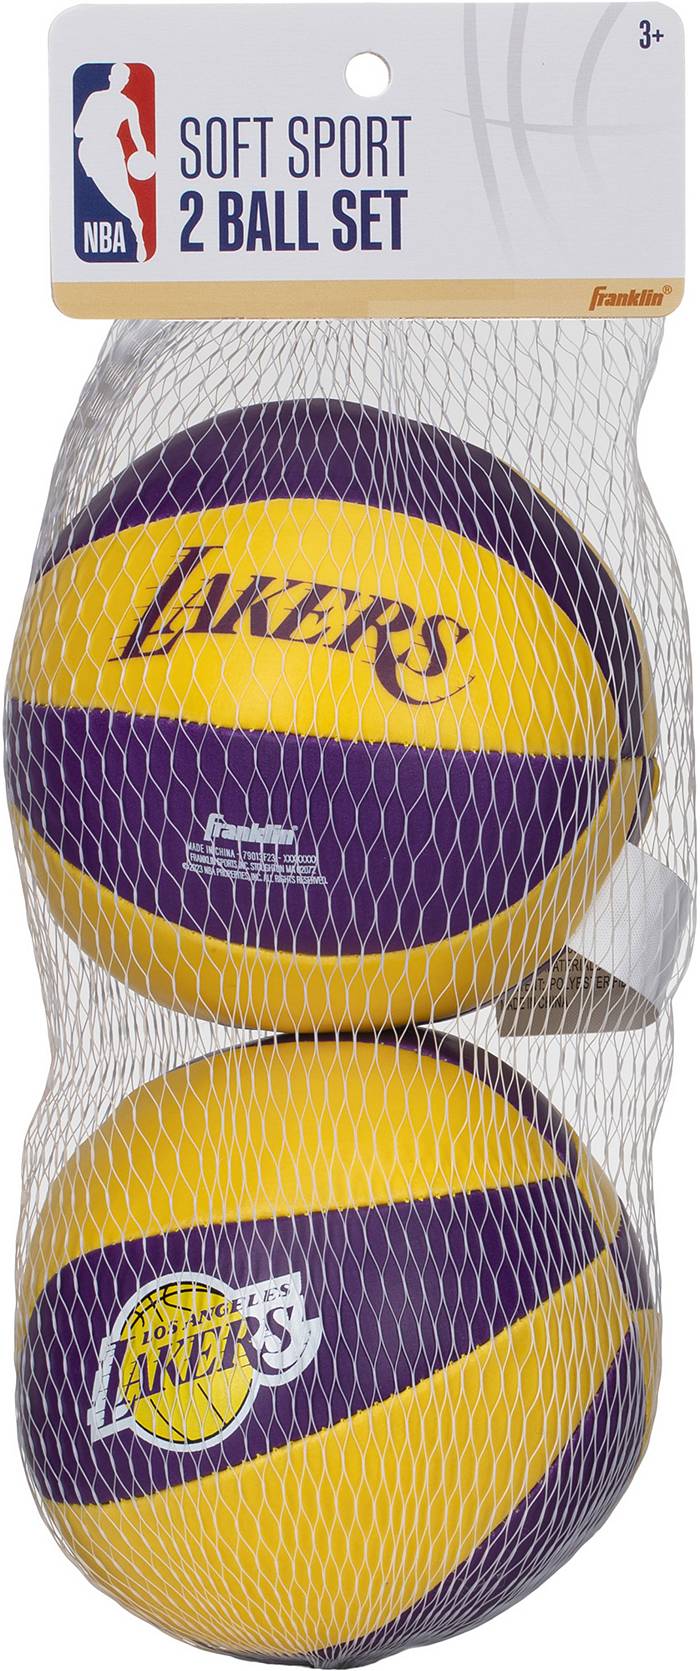 Los Angeles Lakers practice shirt for Franklin 